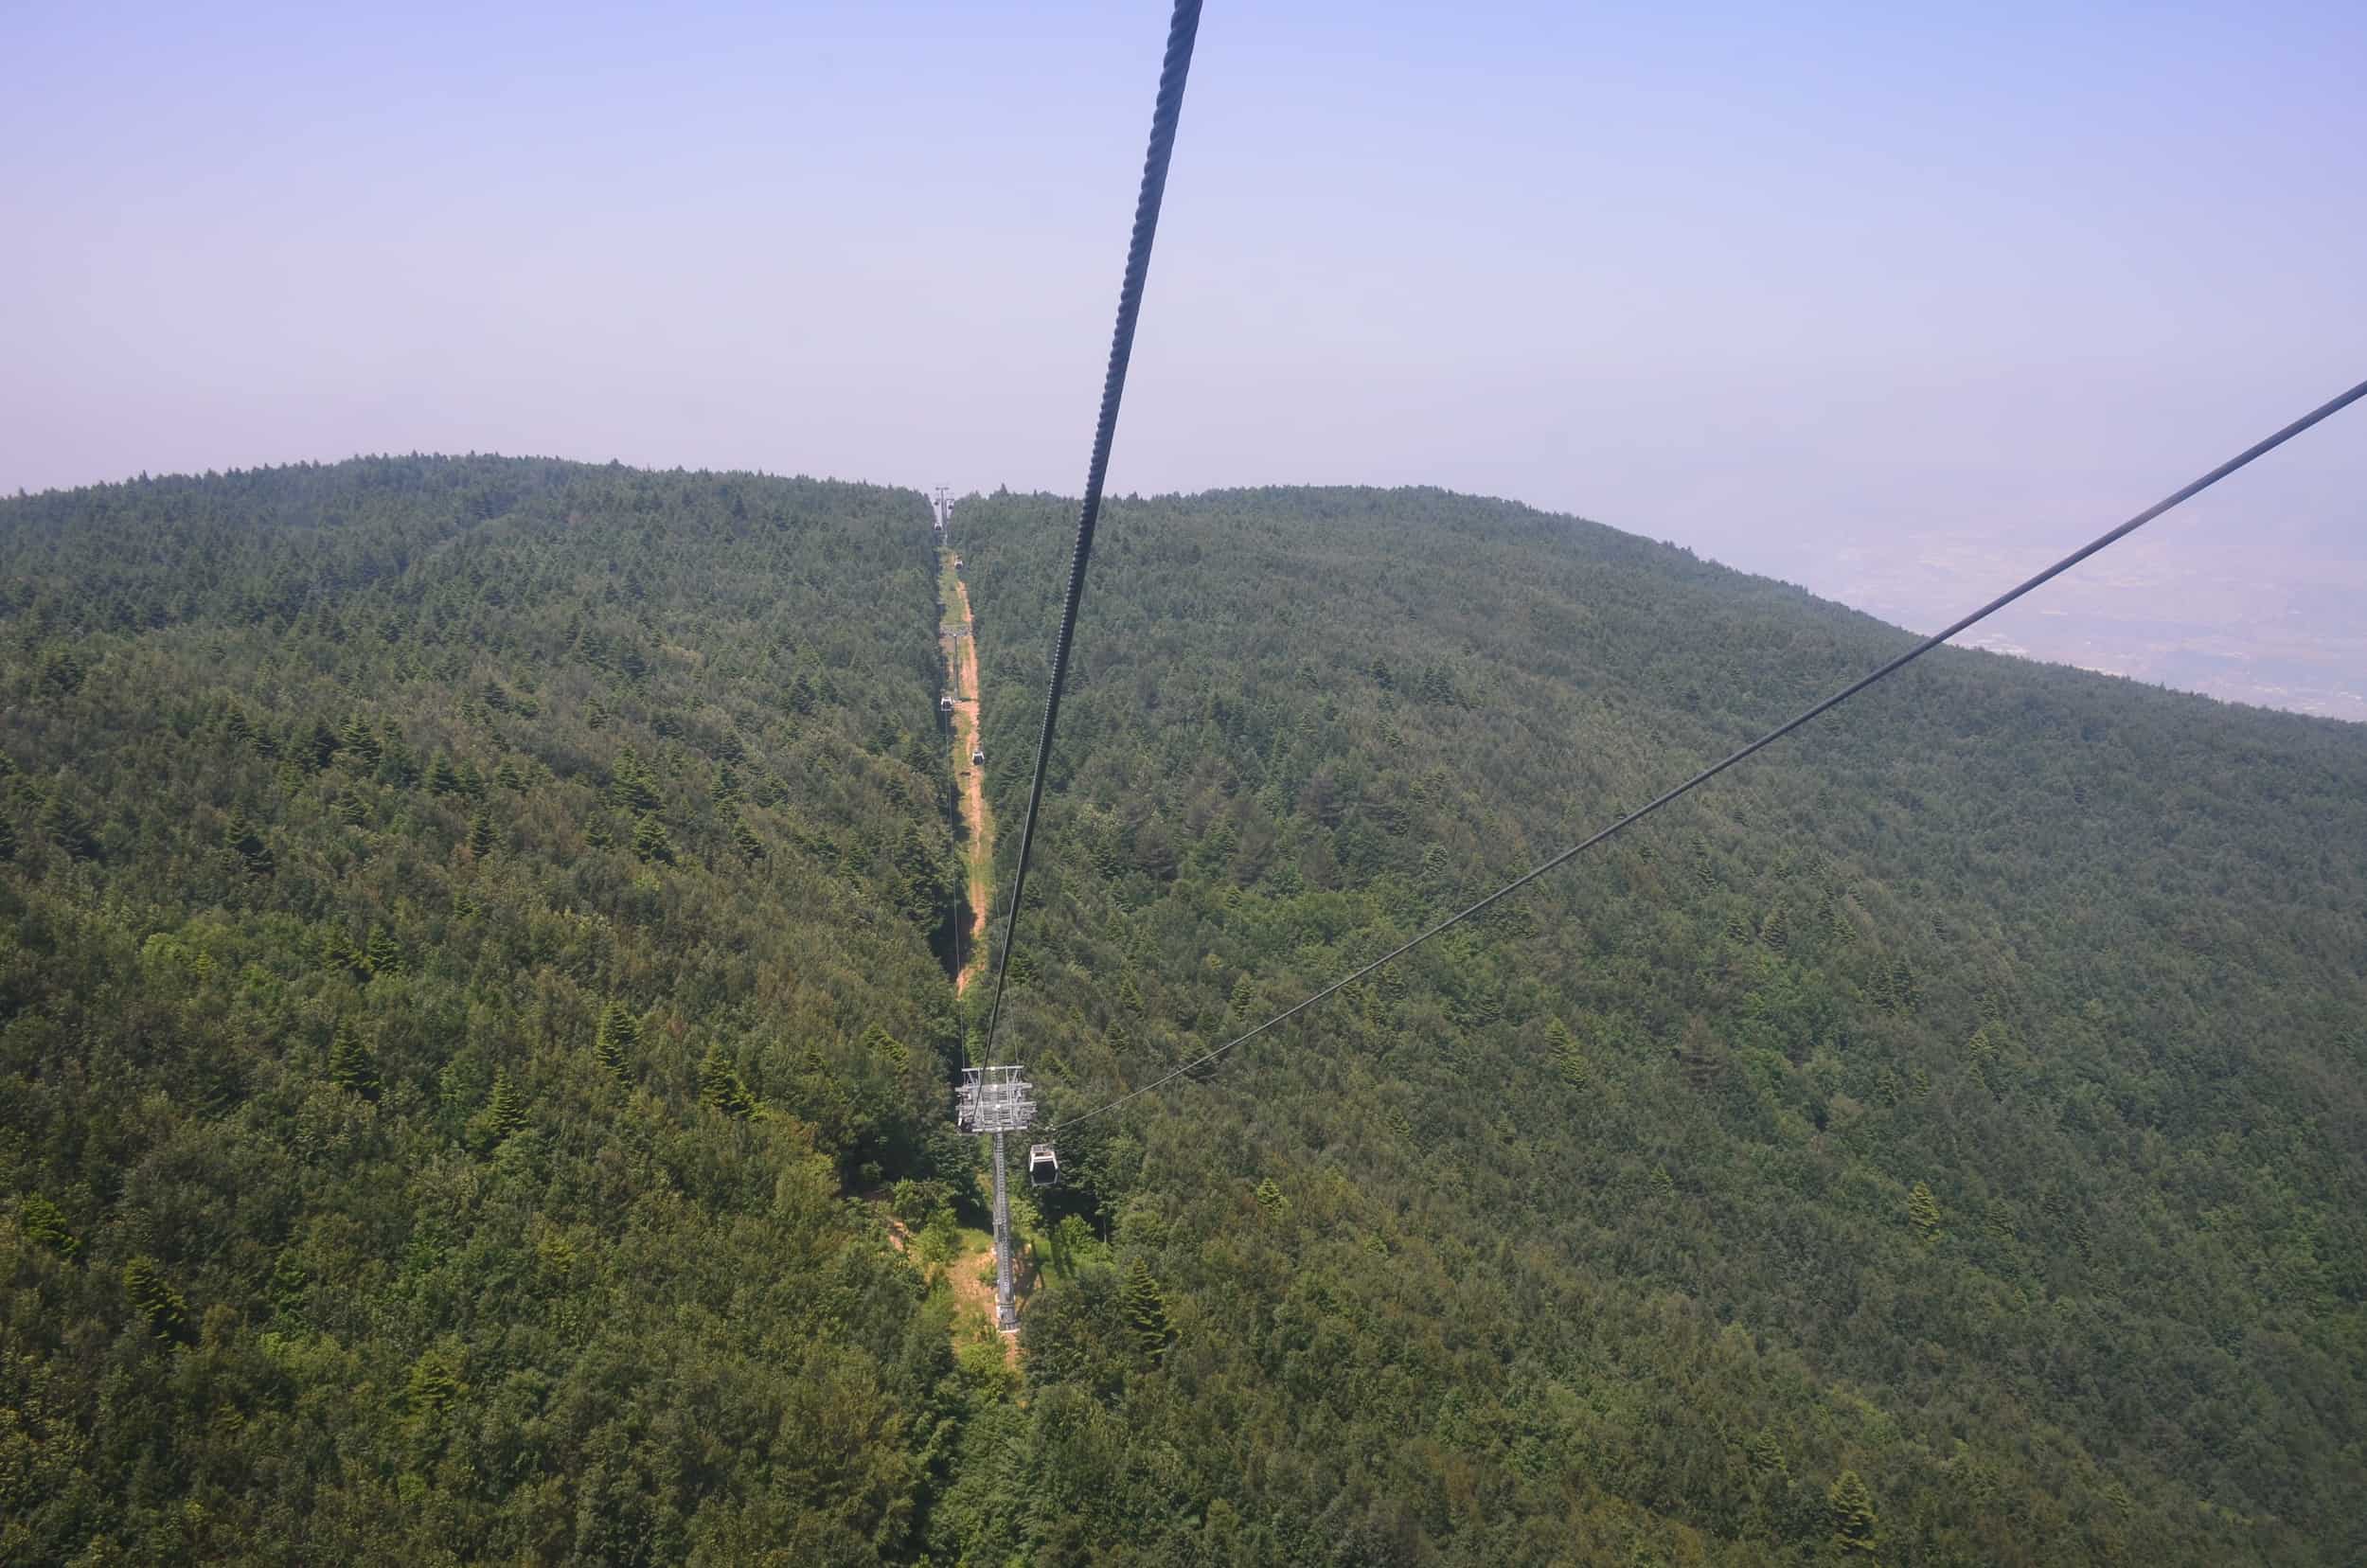 Riding the cable car at Uludağ National Park in Bursa, Turkey